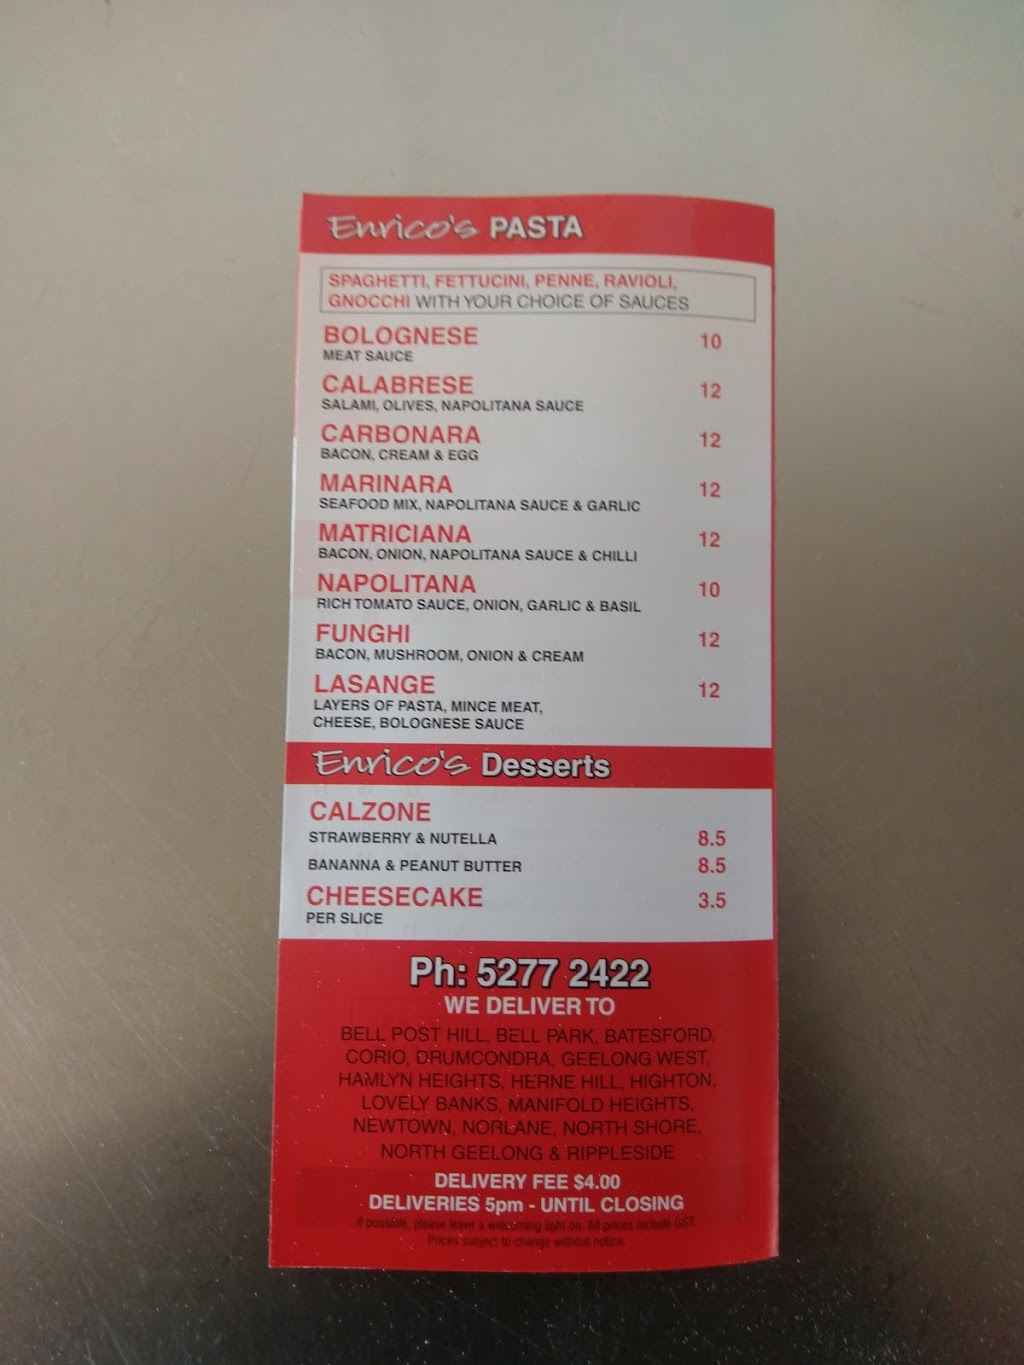 Enricos Pizza & Pasta | 2 Beauford Ave, Bell Post Hill VIC 3215, Australia | Phone: (03) 5277 2422